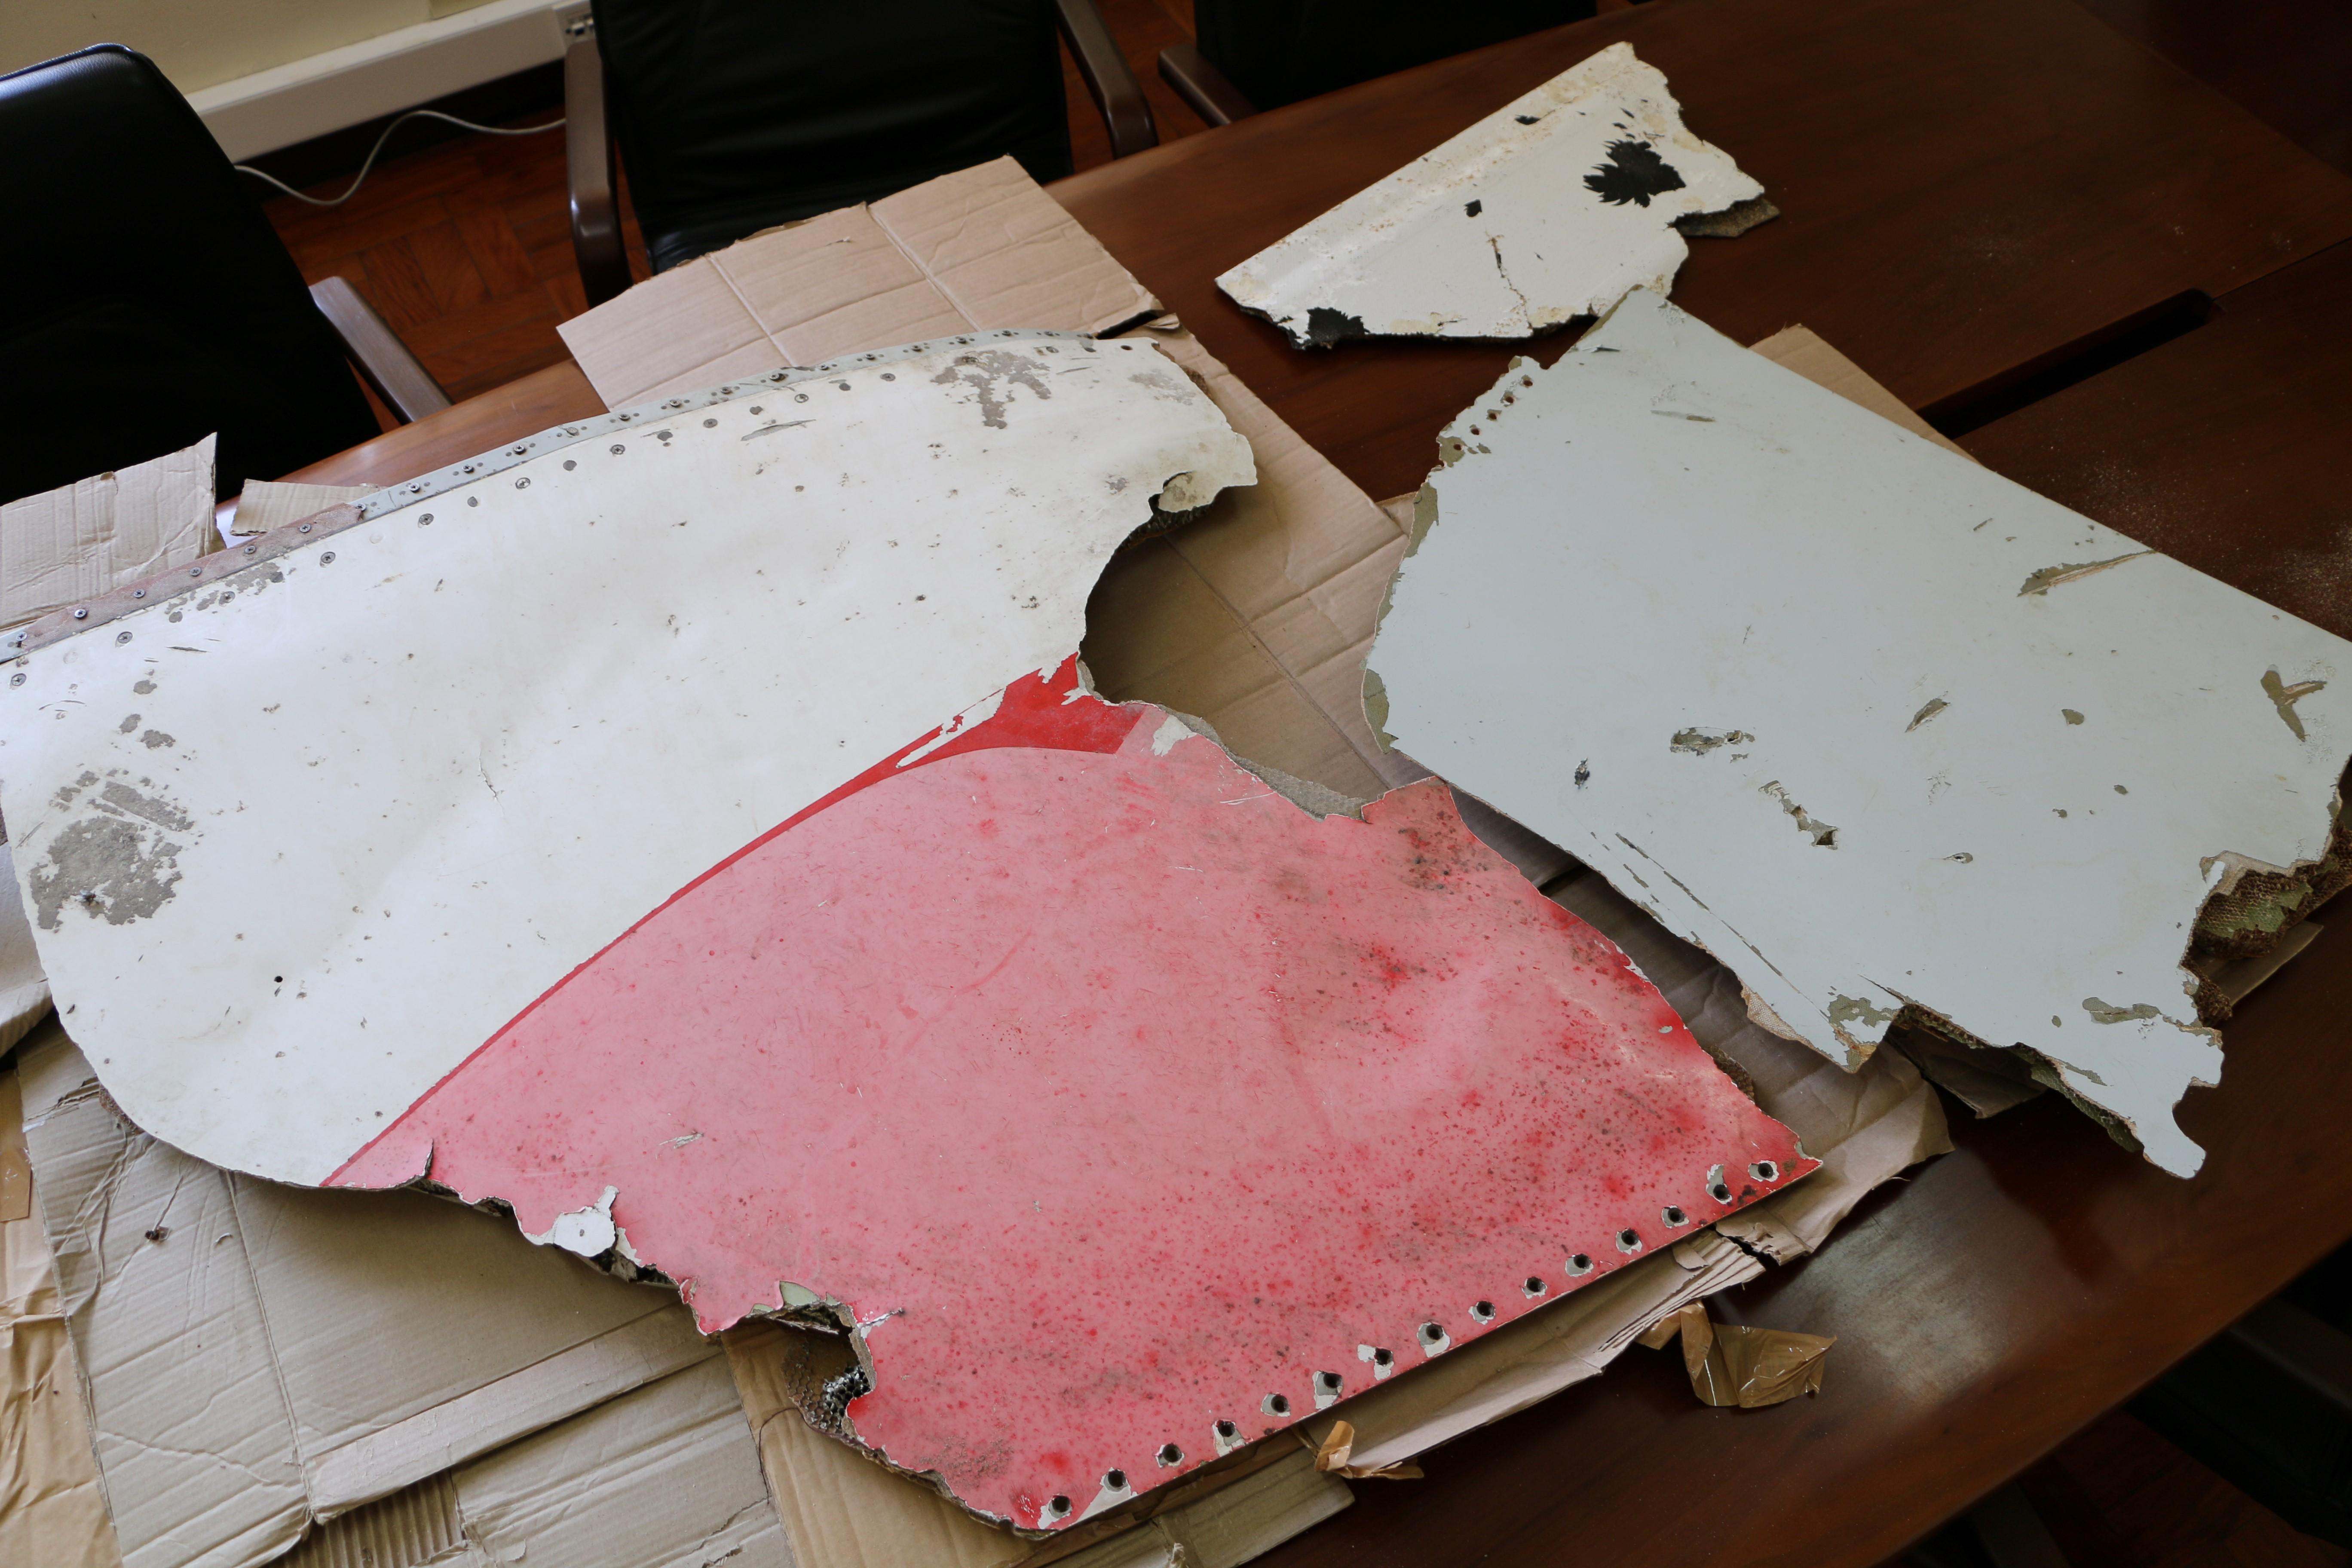 Malaysia Airlines Flight 370 debris successfully identified by officials - CBS News